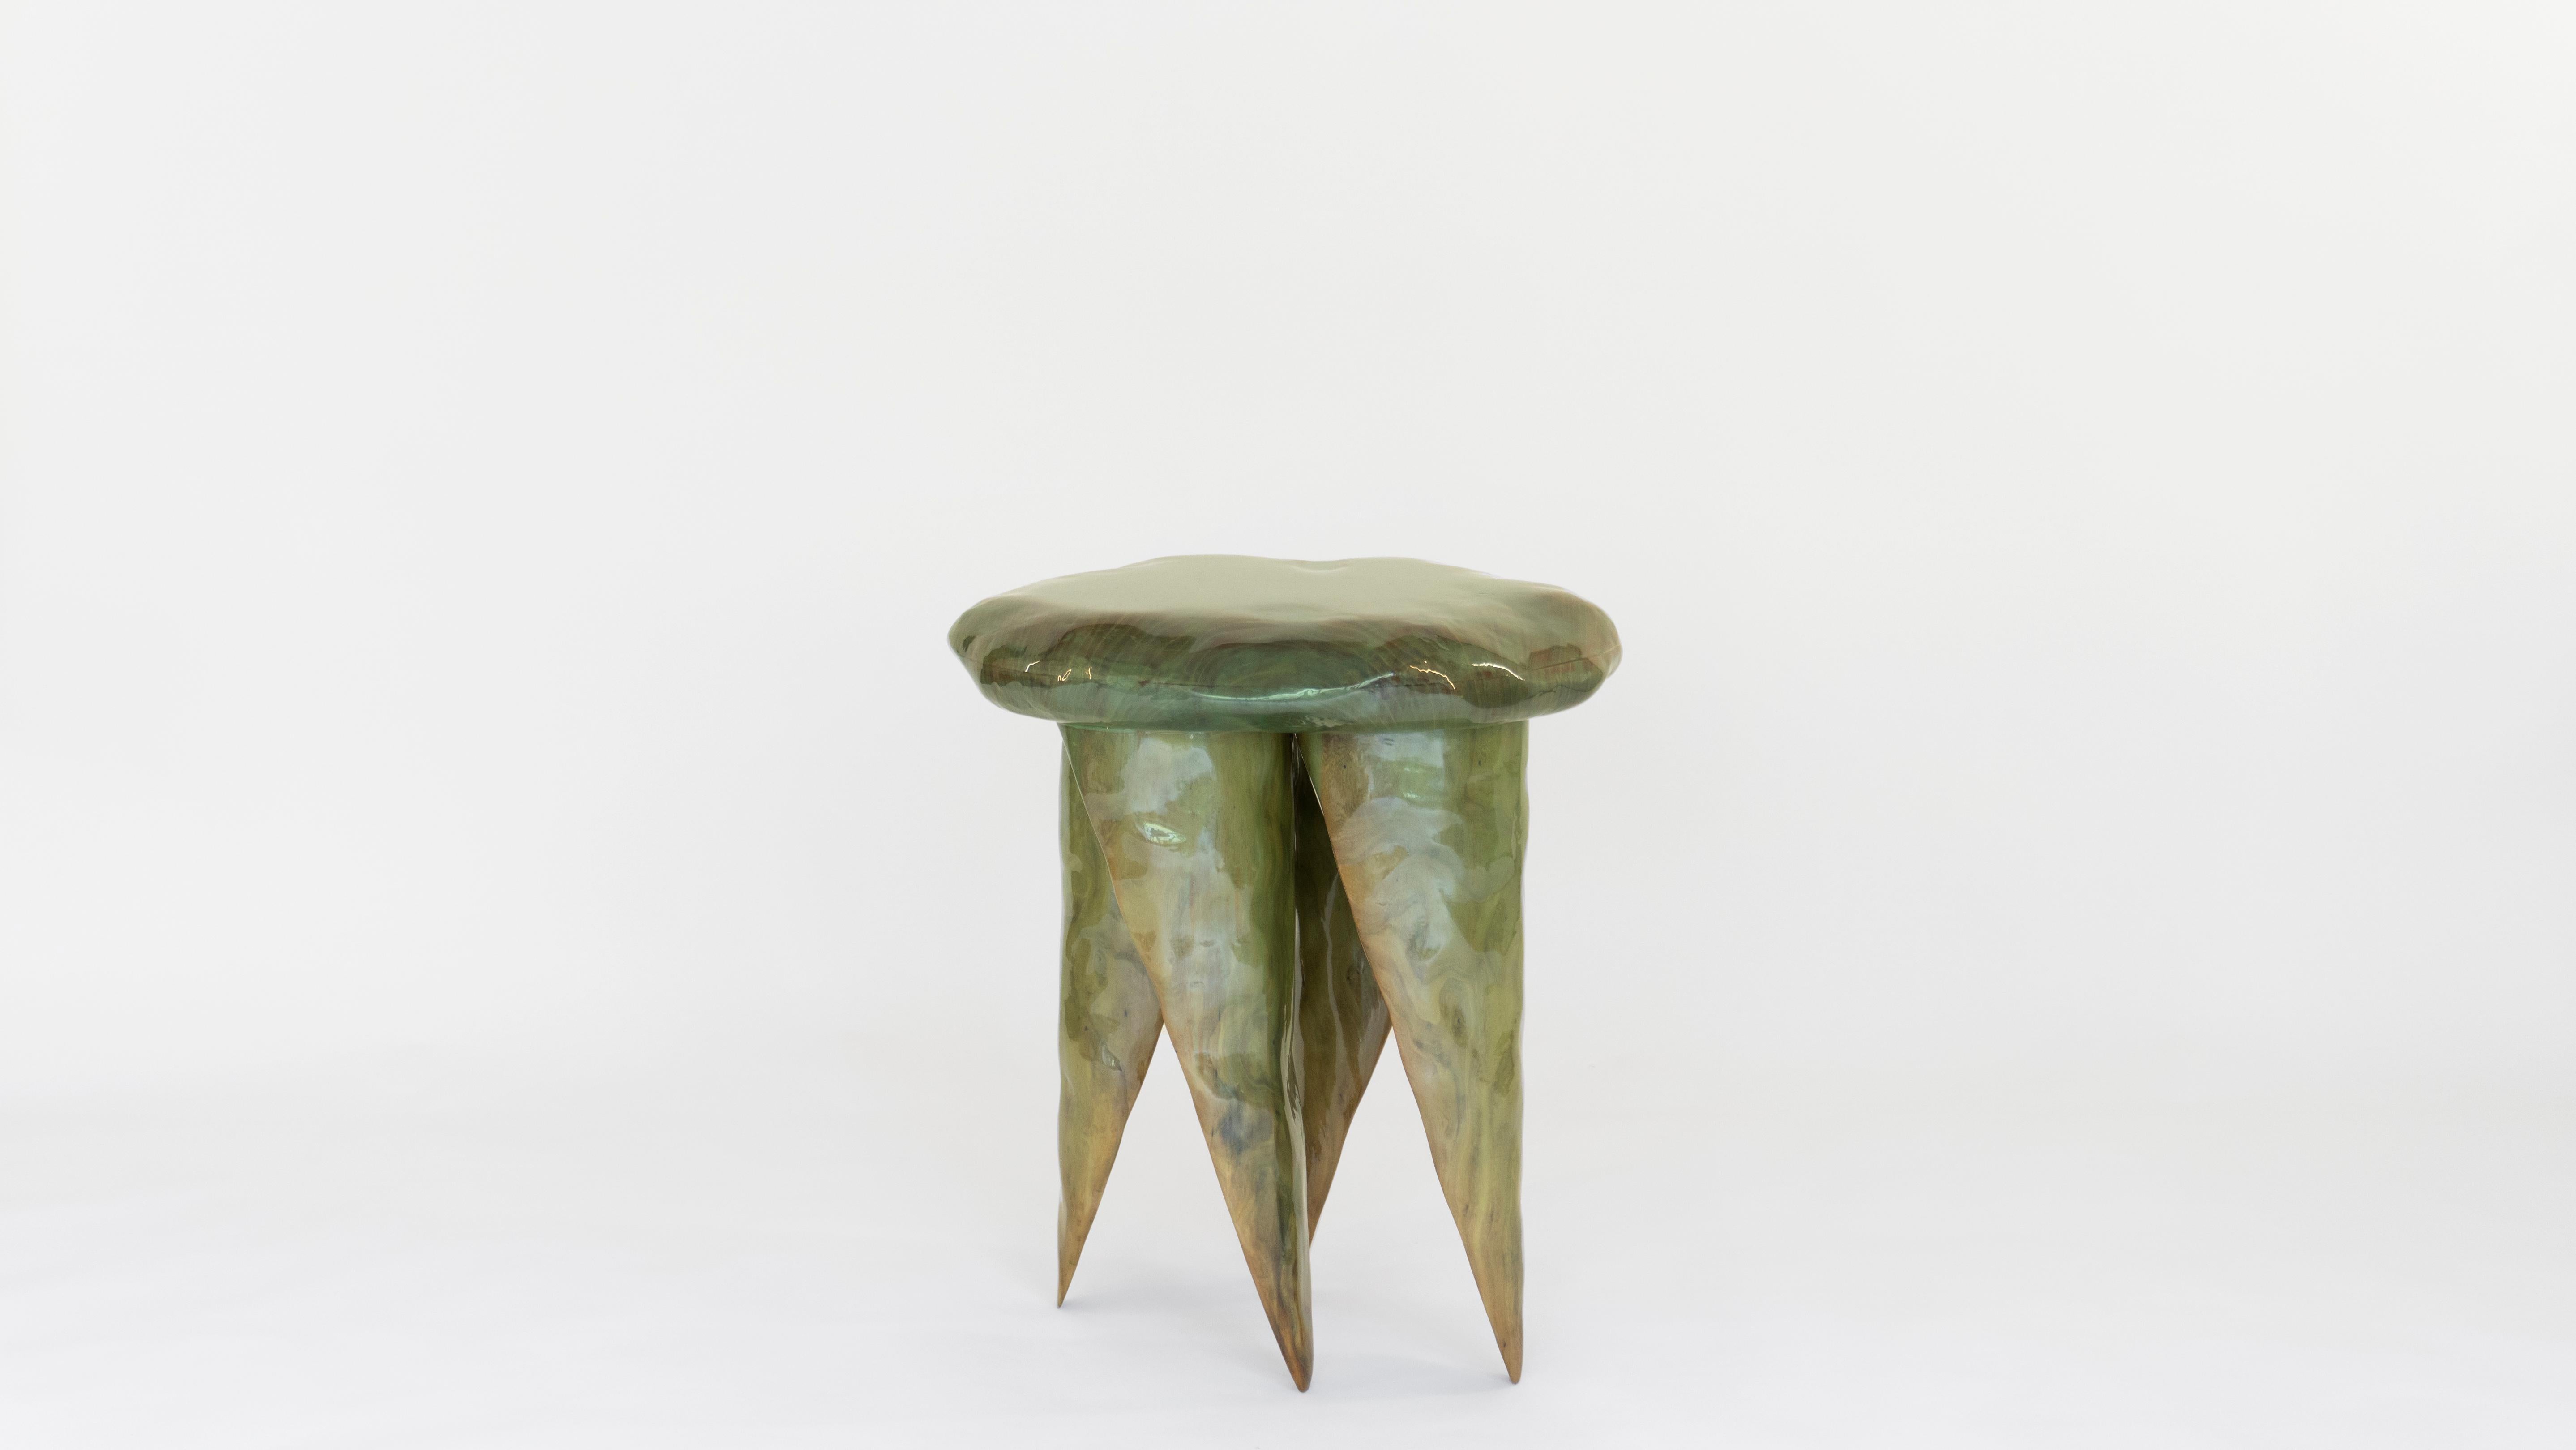 Obeisance Side Table by Henry D'ath
Dimensions: D 50 x H 50 cm
Materials: Wood.
Available in natural finish too.

Piece is handmade by artist.

The Obeisance side table is propped upon four stout limbs, mirrored from one side to the other. From most